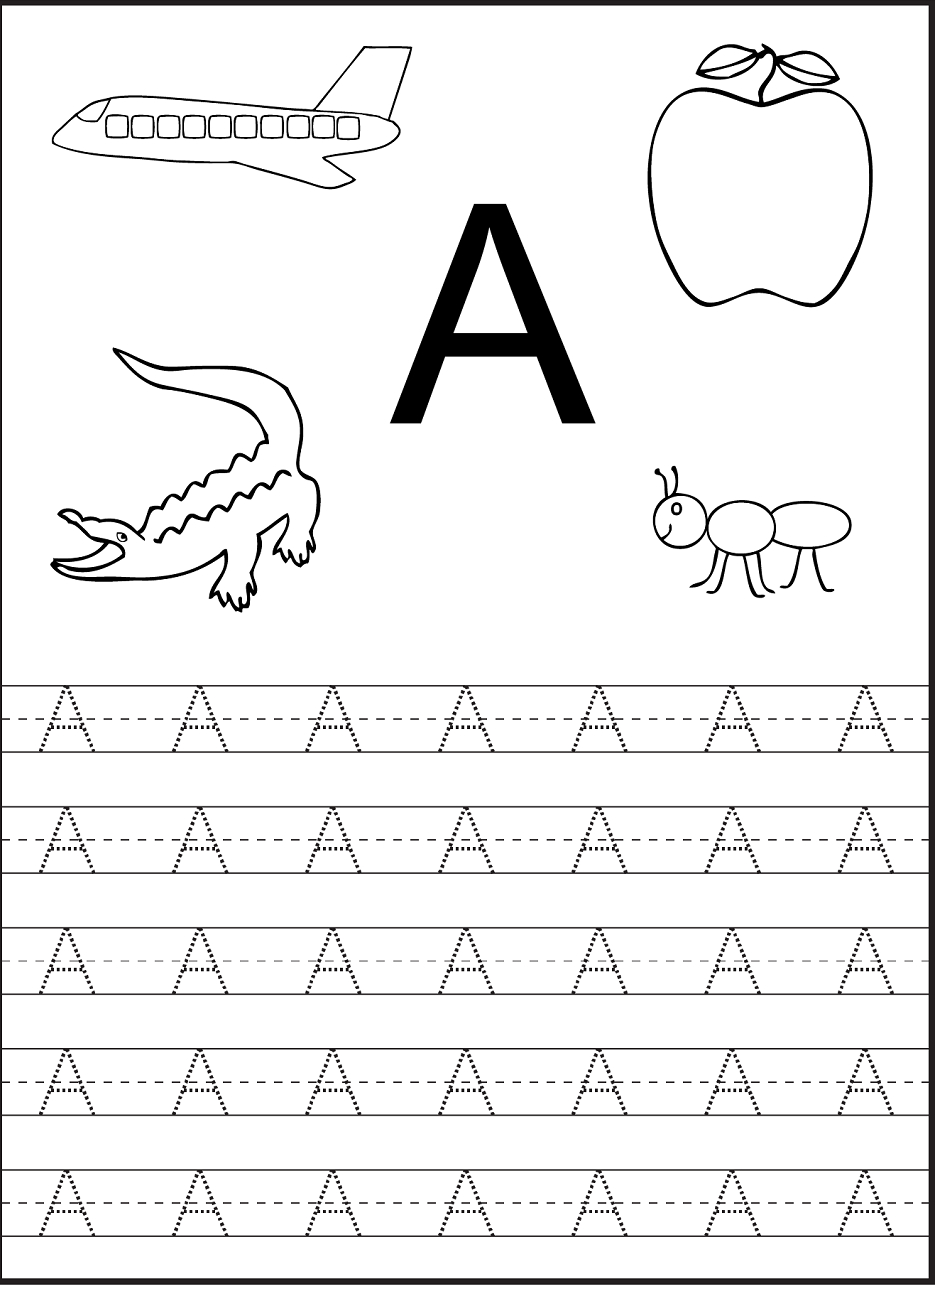 Tracing The Letter A Free Printable | Alphabet And Numbers Learning - Free Printable Preschool Worksheets Tracing Letters